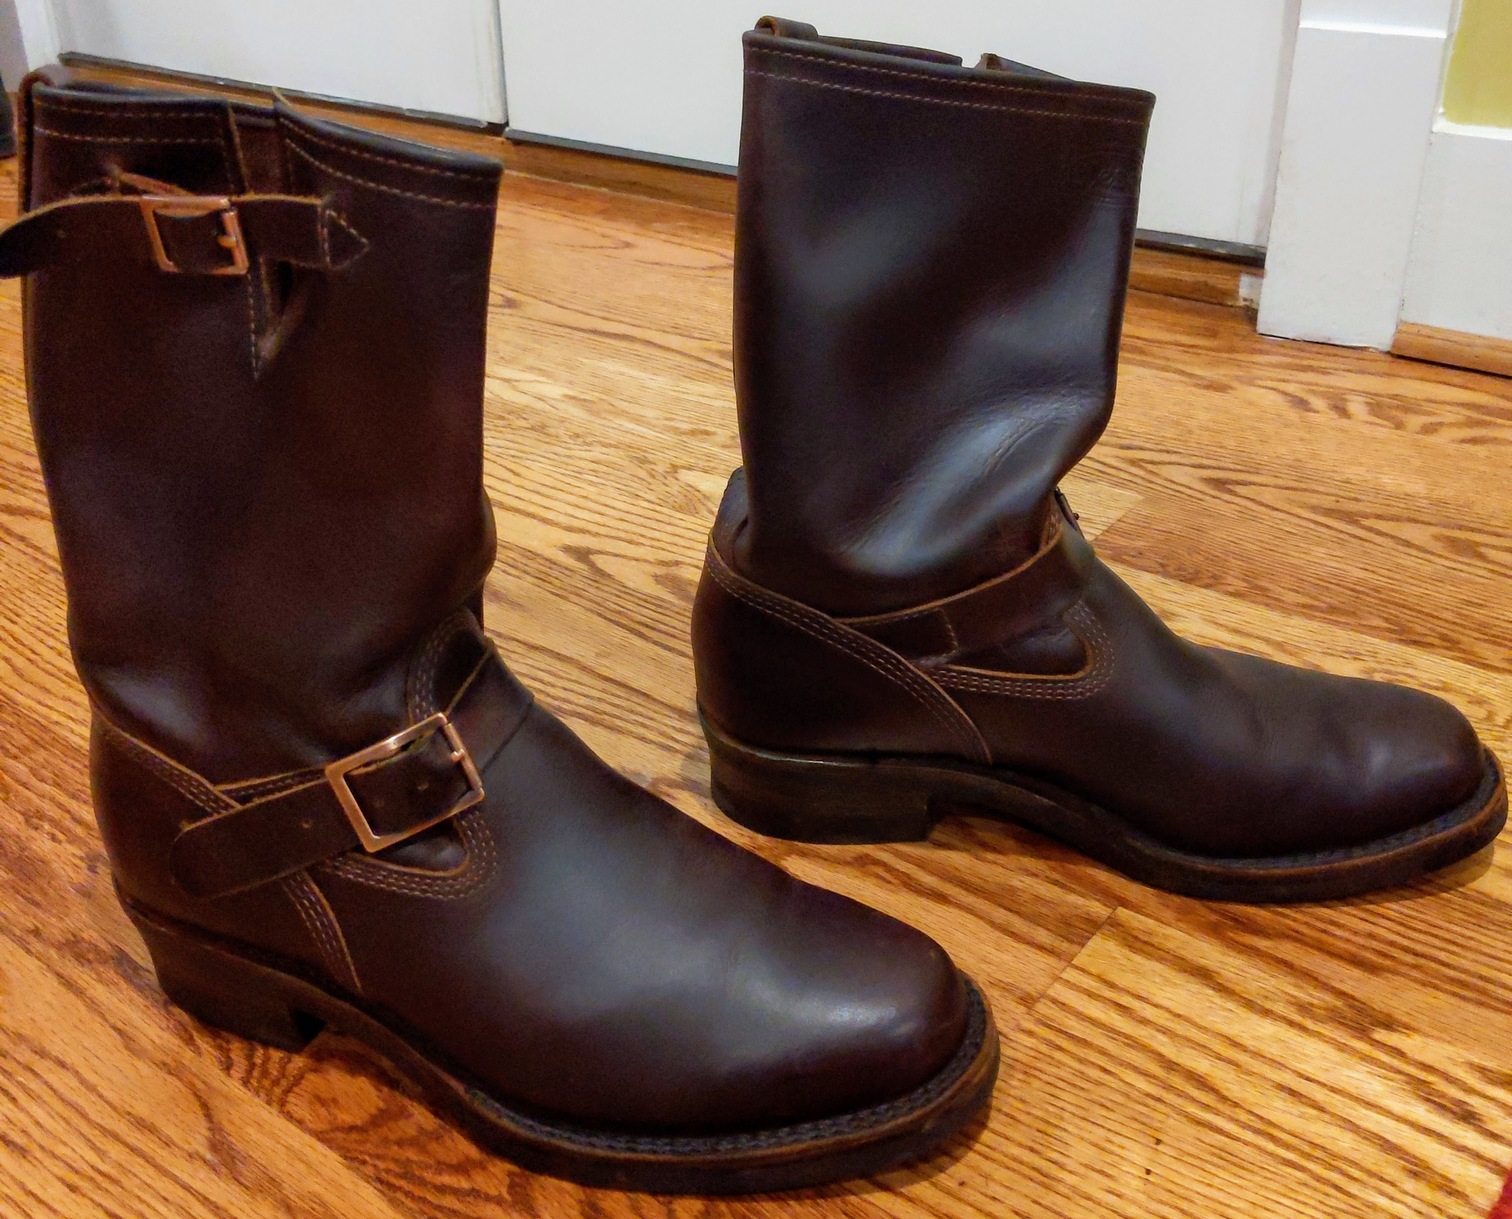 Wesco/Iron Heart Collab Boss Engineer boots, Brown , 9.5, $300 | The ...